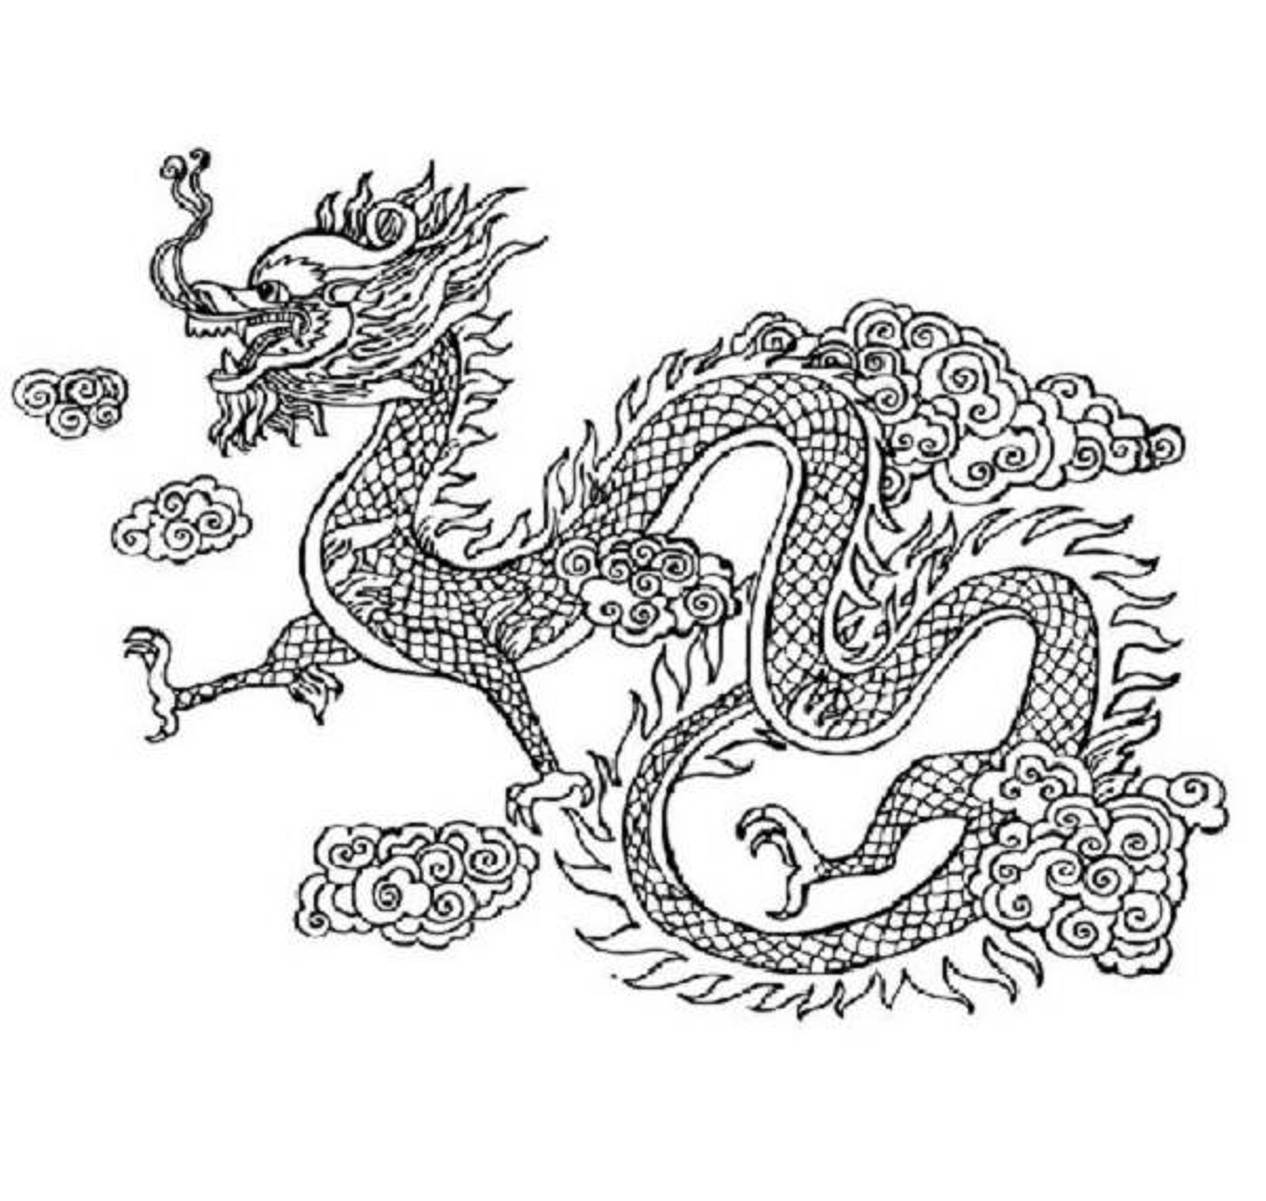 Realistic Dragon Printable Coloring Pages - Coloring Page